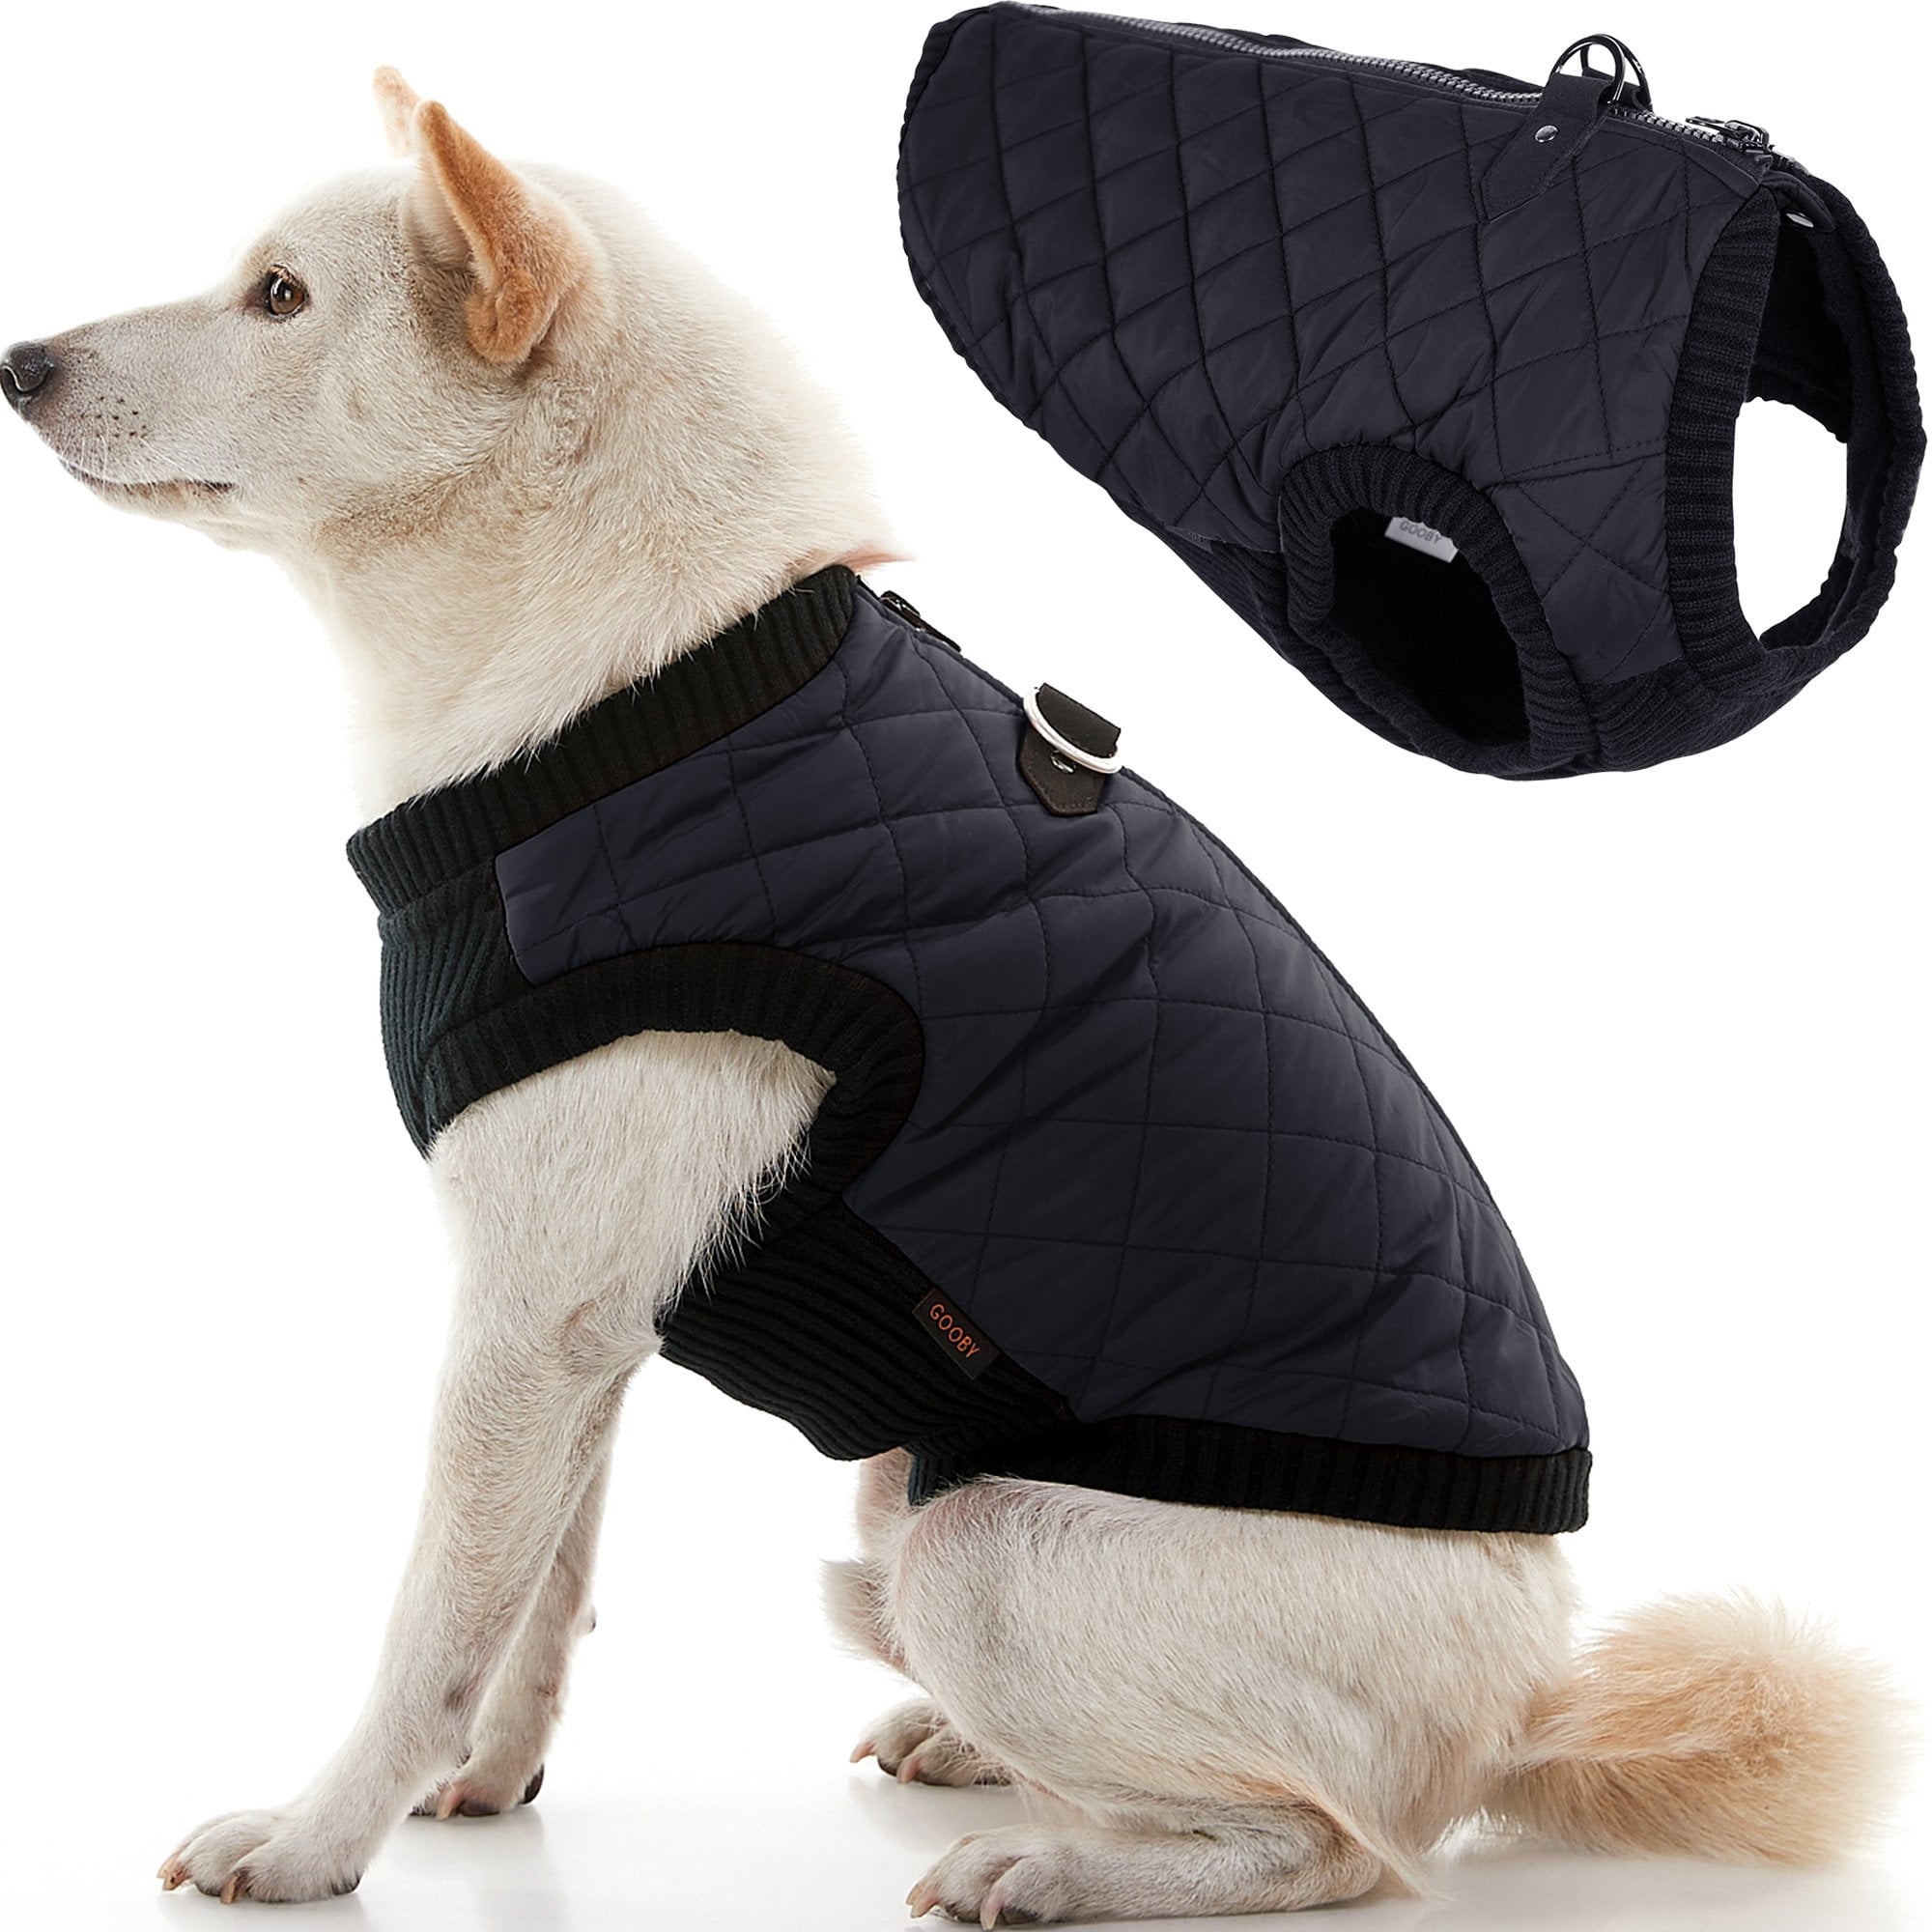 Pet Dog Winter Jacket Clothes Breathable Cozy Sweater Dog Soft Cotton Vest Coat for Puppy Kitty Indoor Outdoor